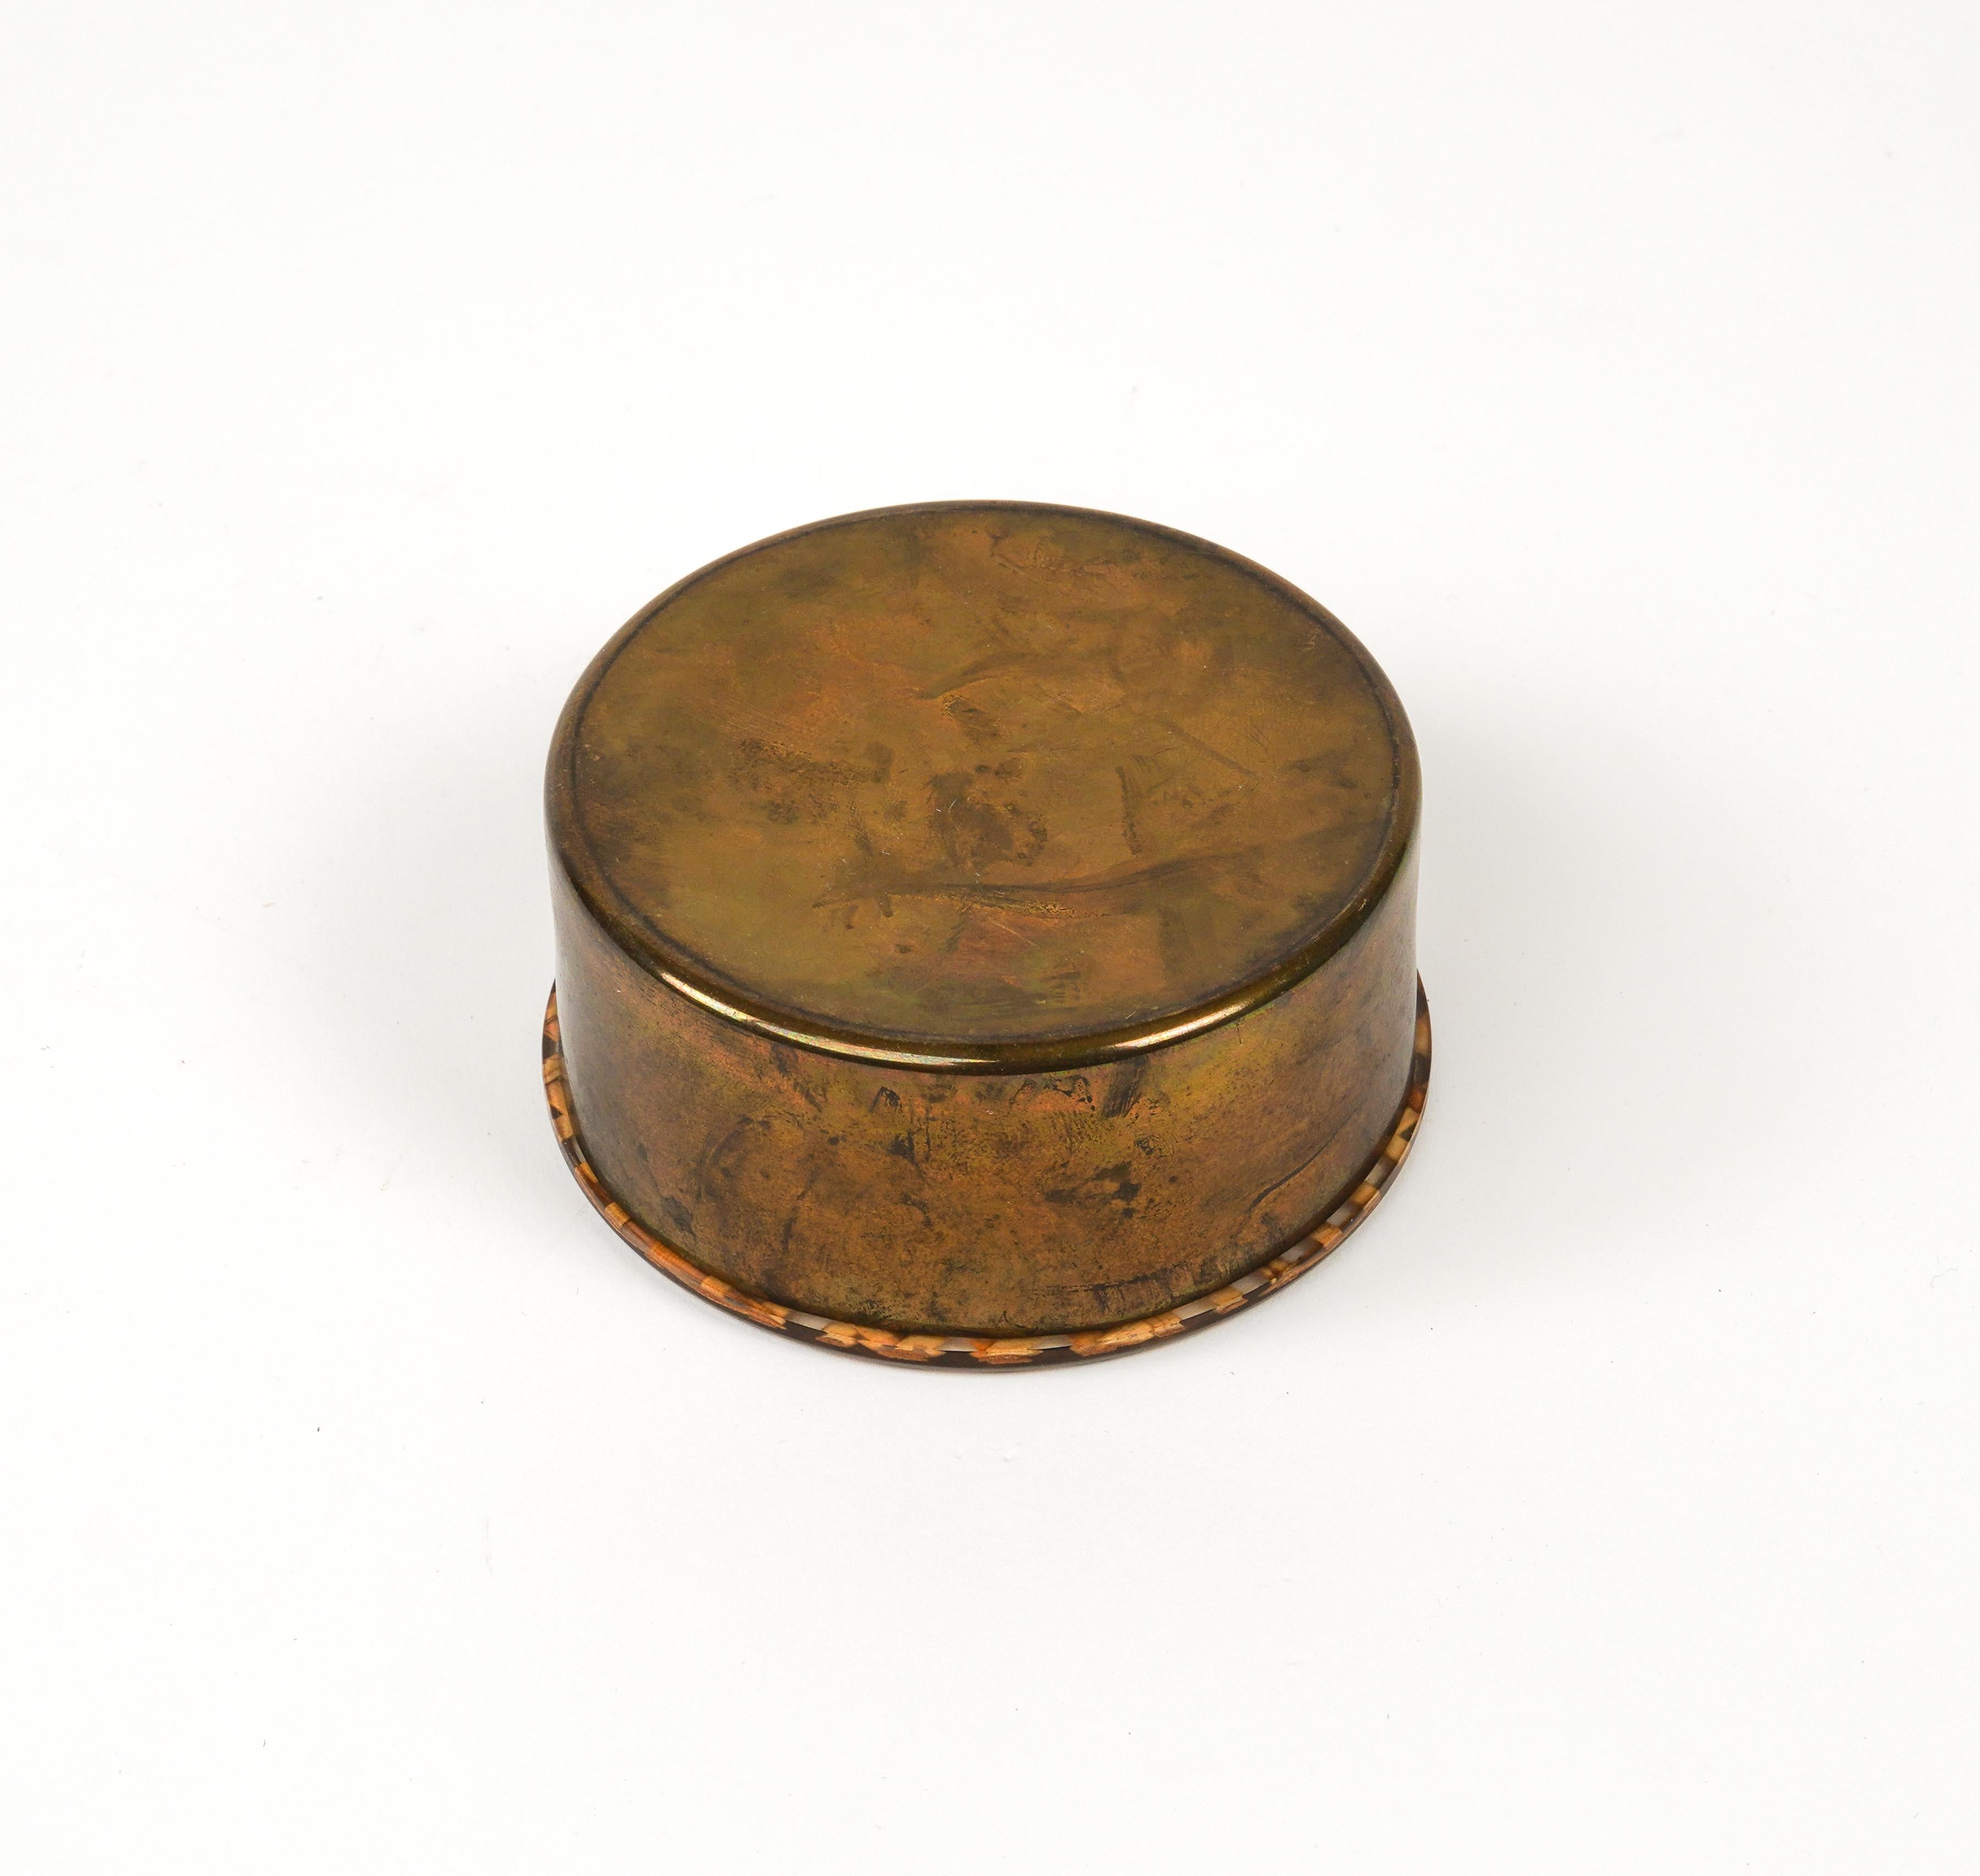 Midcentury Round Box in Brass, Lucite & Rattan Christian Dior Style, Italy 1970s For Sale 5